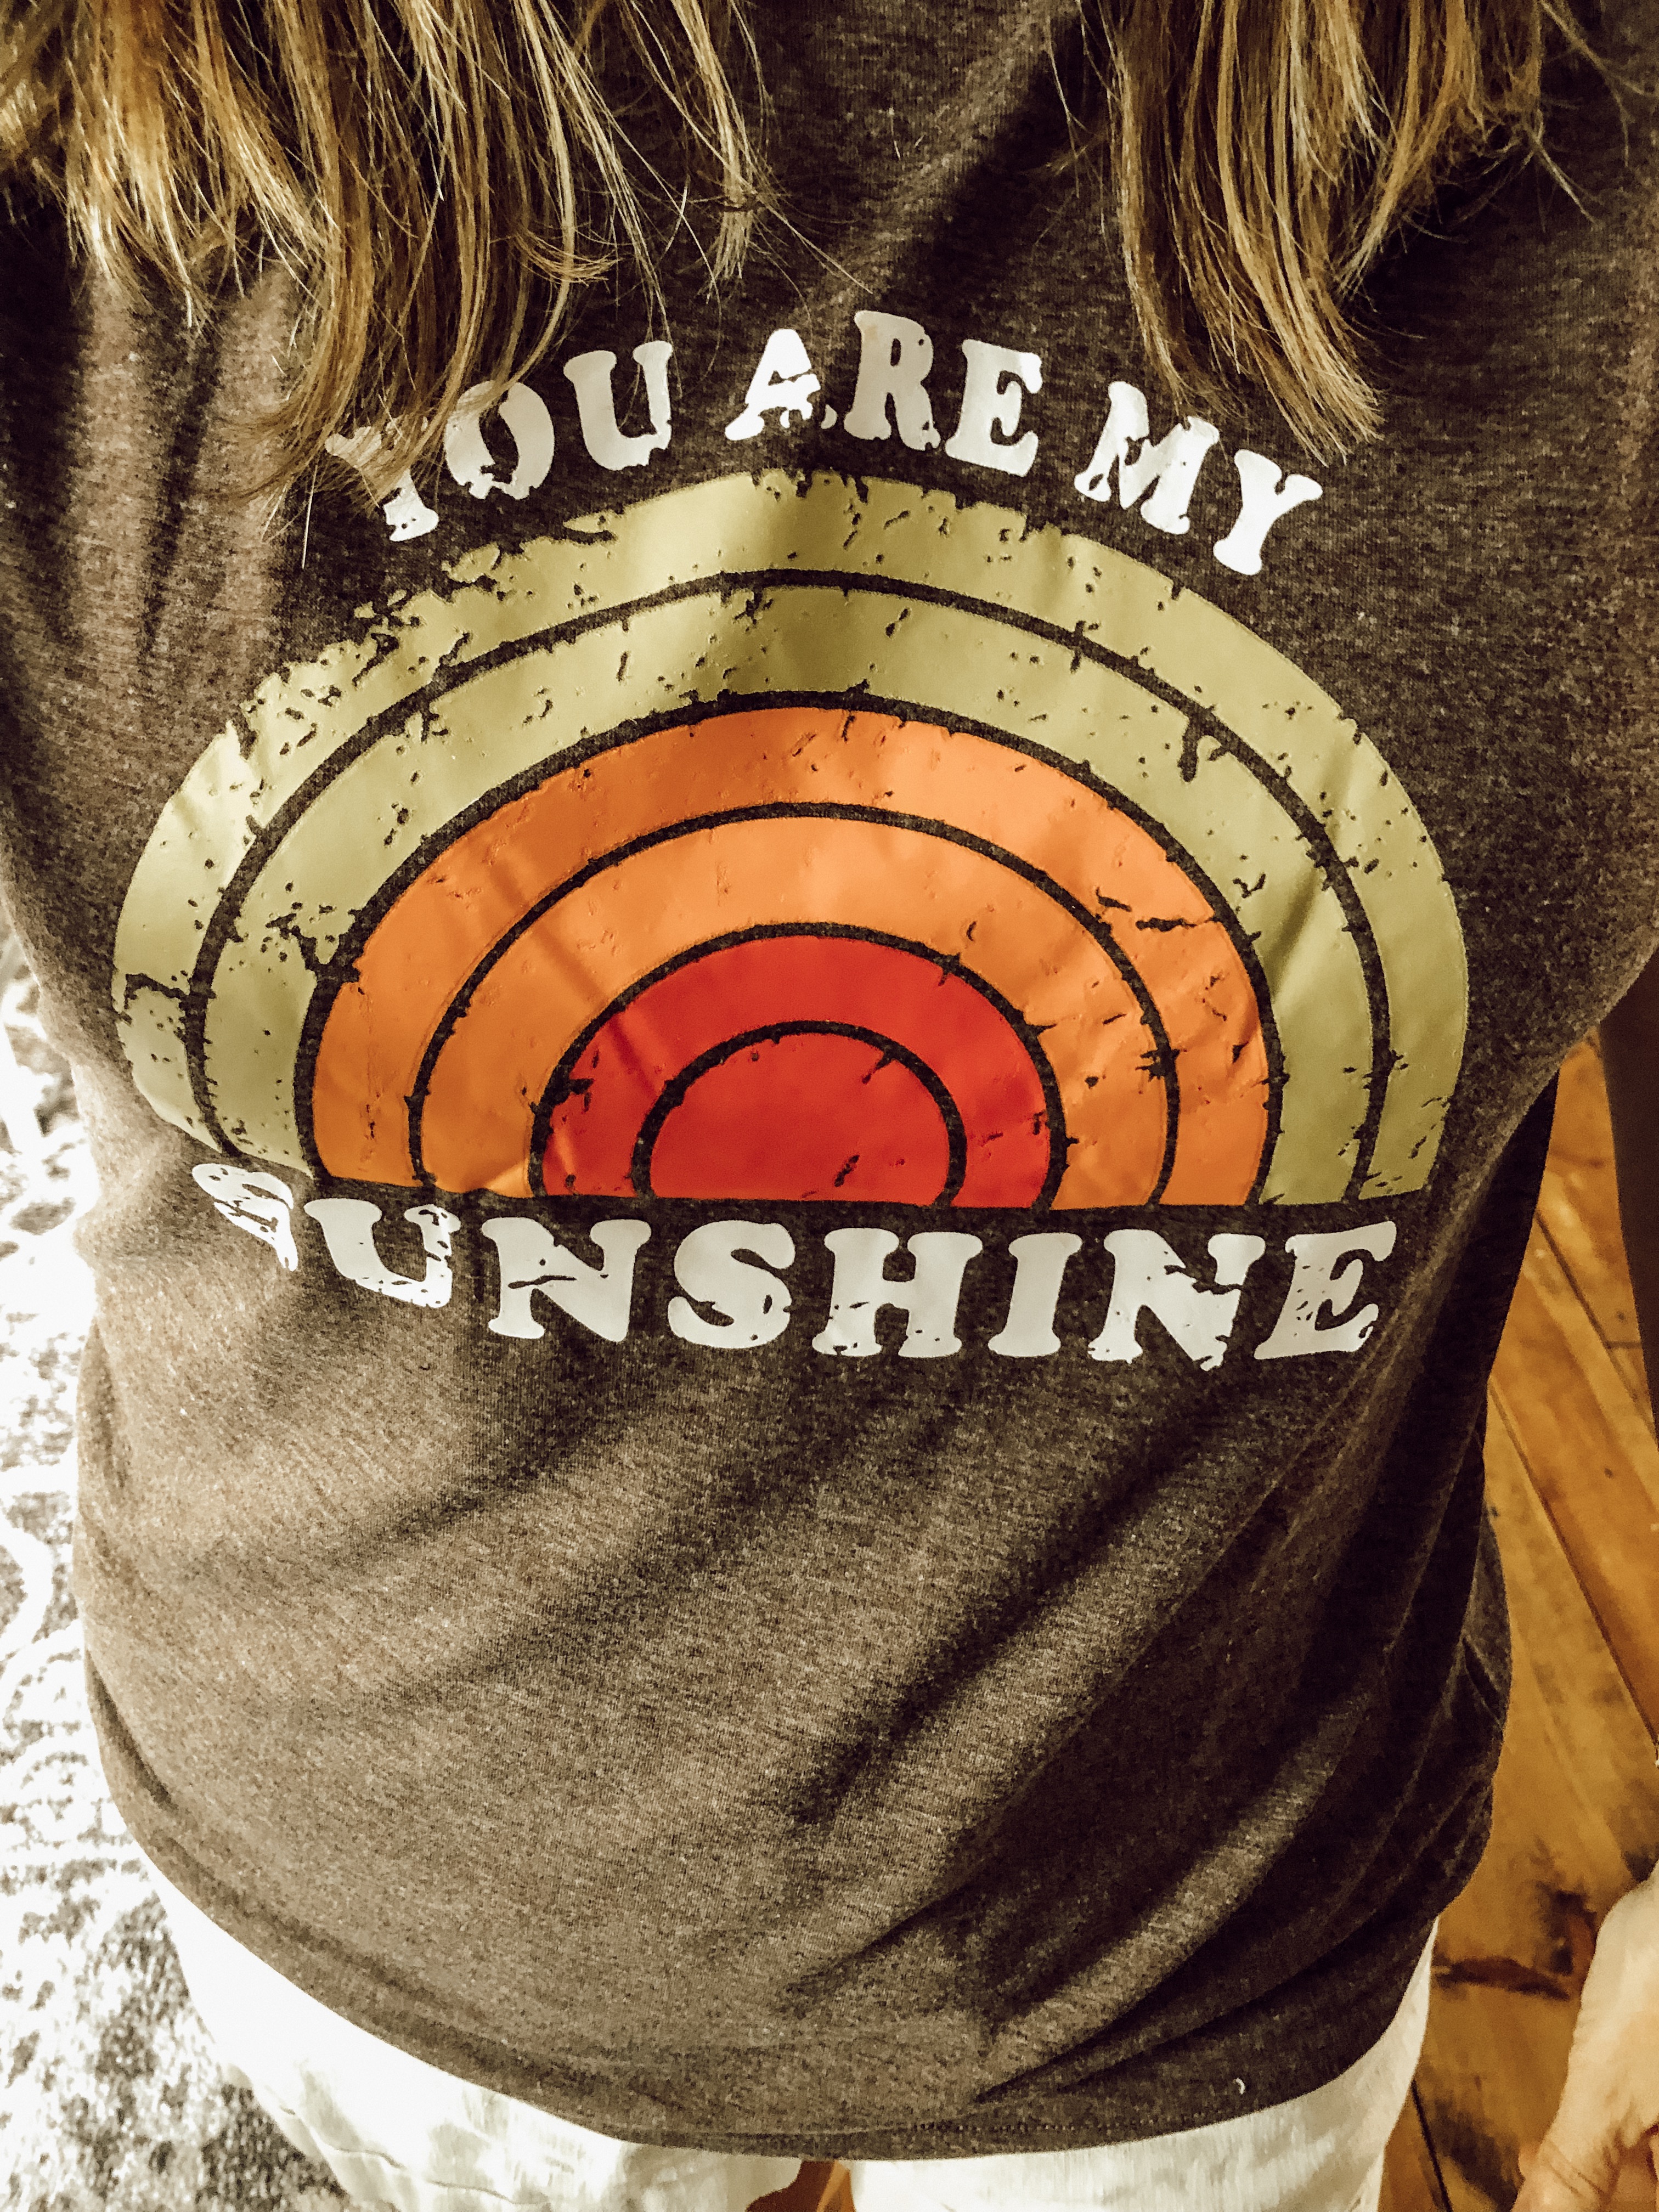 Vintage Tee Shirts - House on Winchester